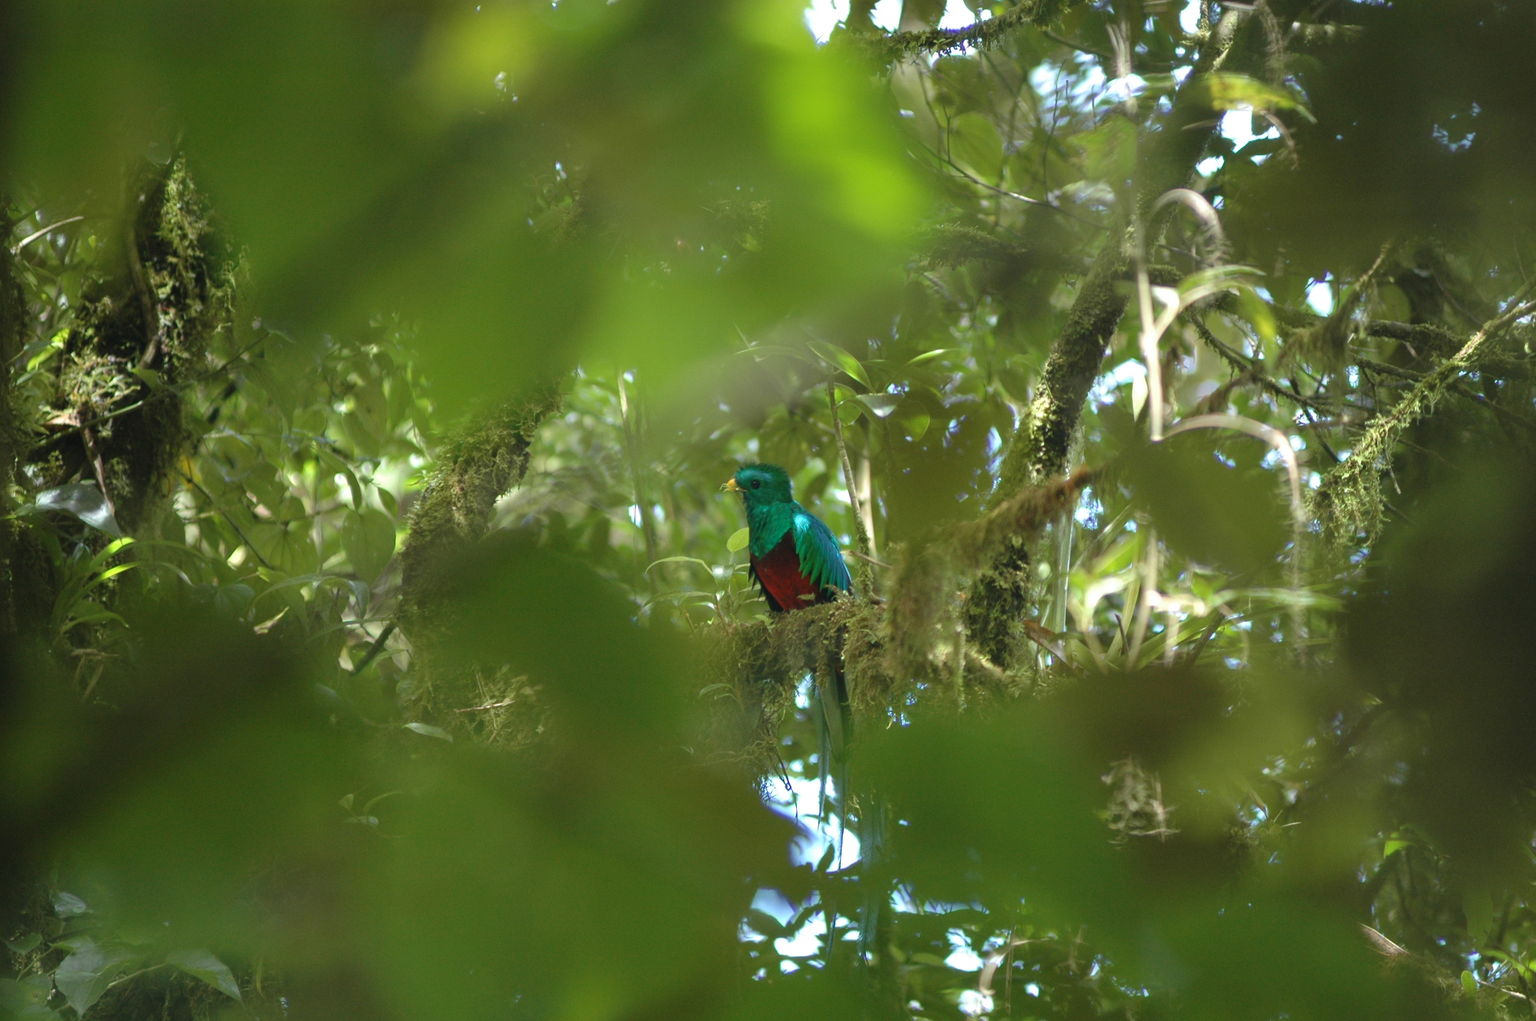 The Resplendent Quetzal, national bird of Guatemala that also lends its name to that country's currency, surveys its nest as tourists lie waiting to catch a glimpse.